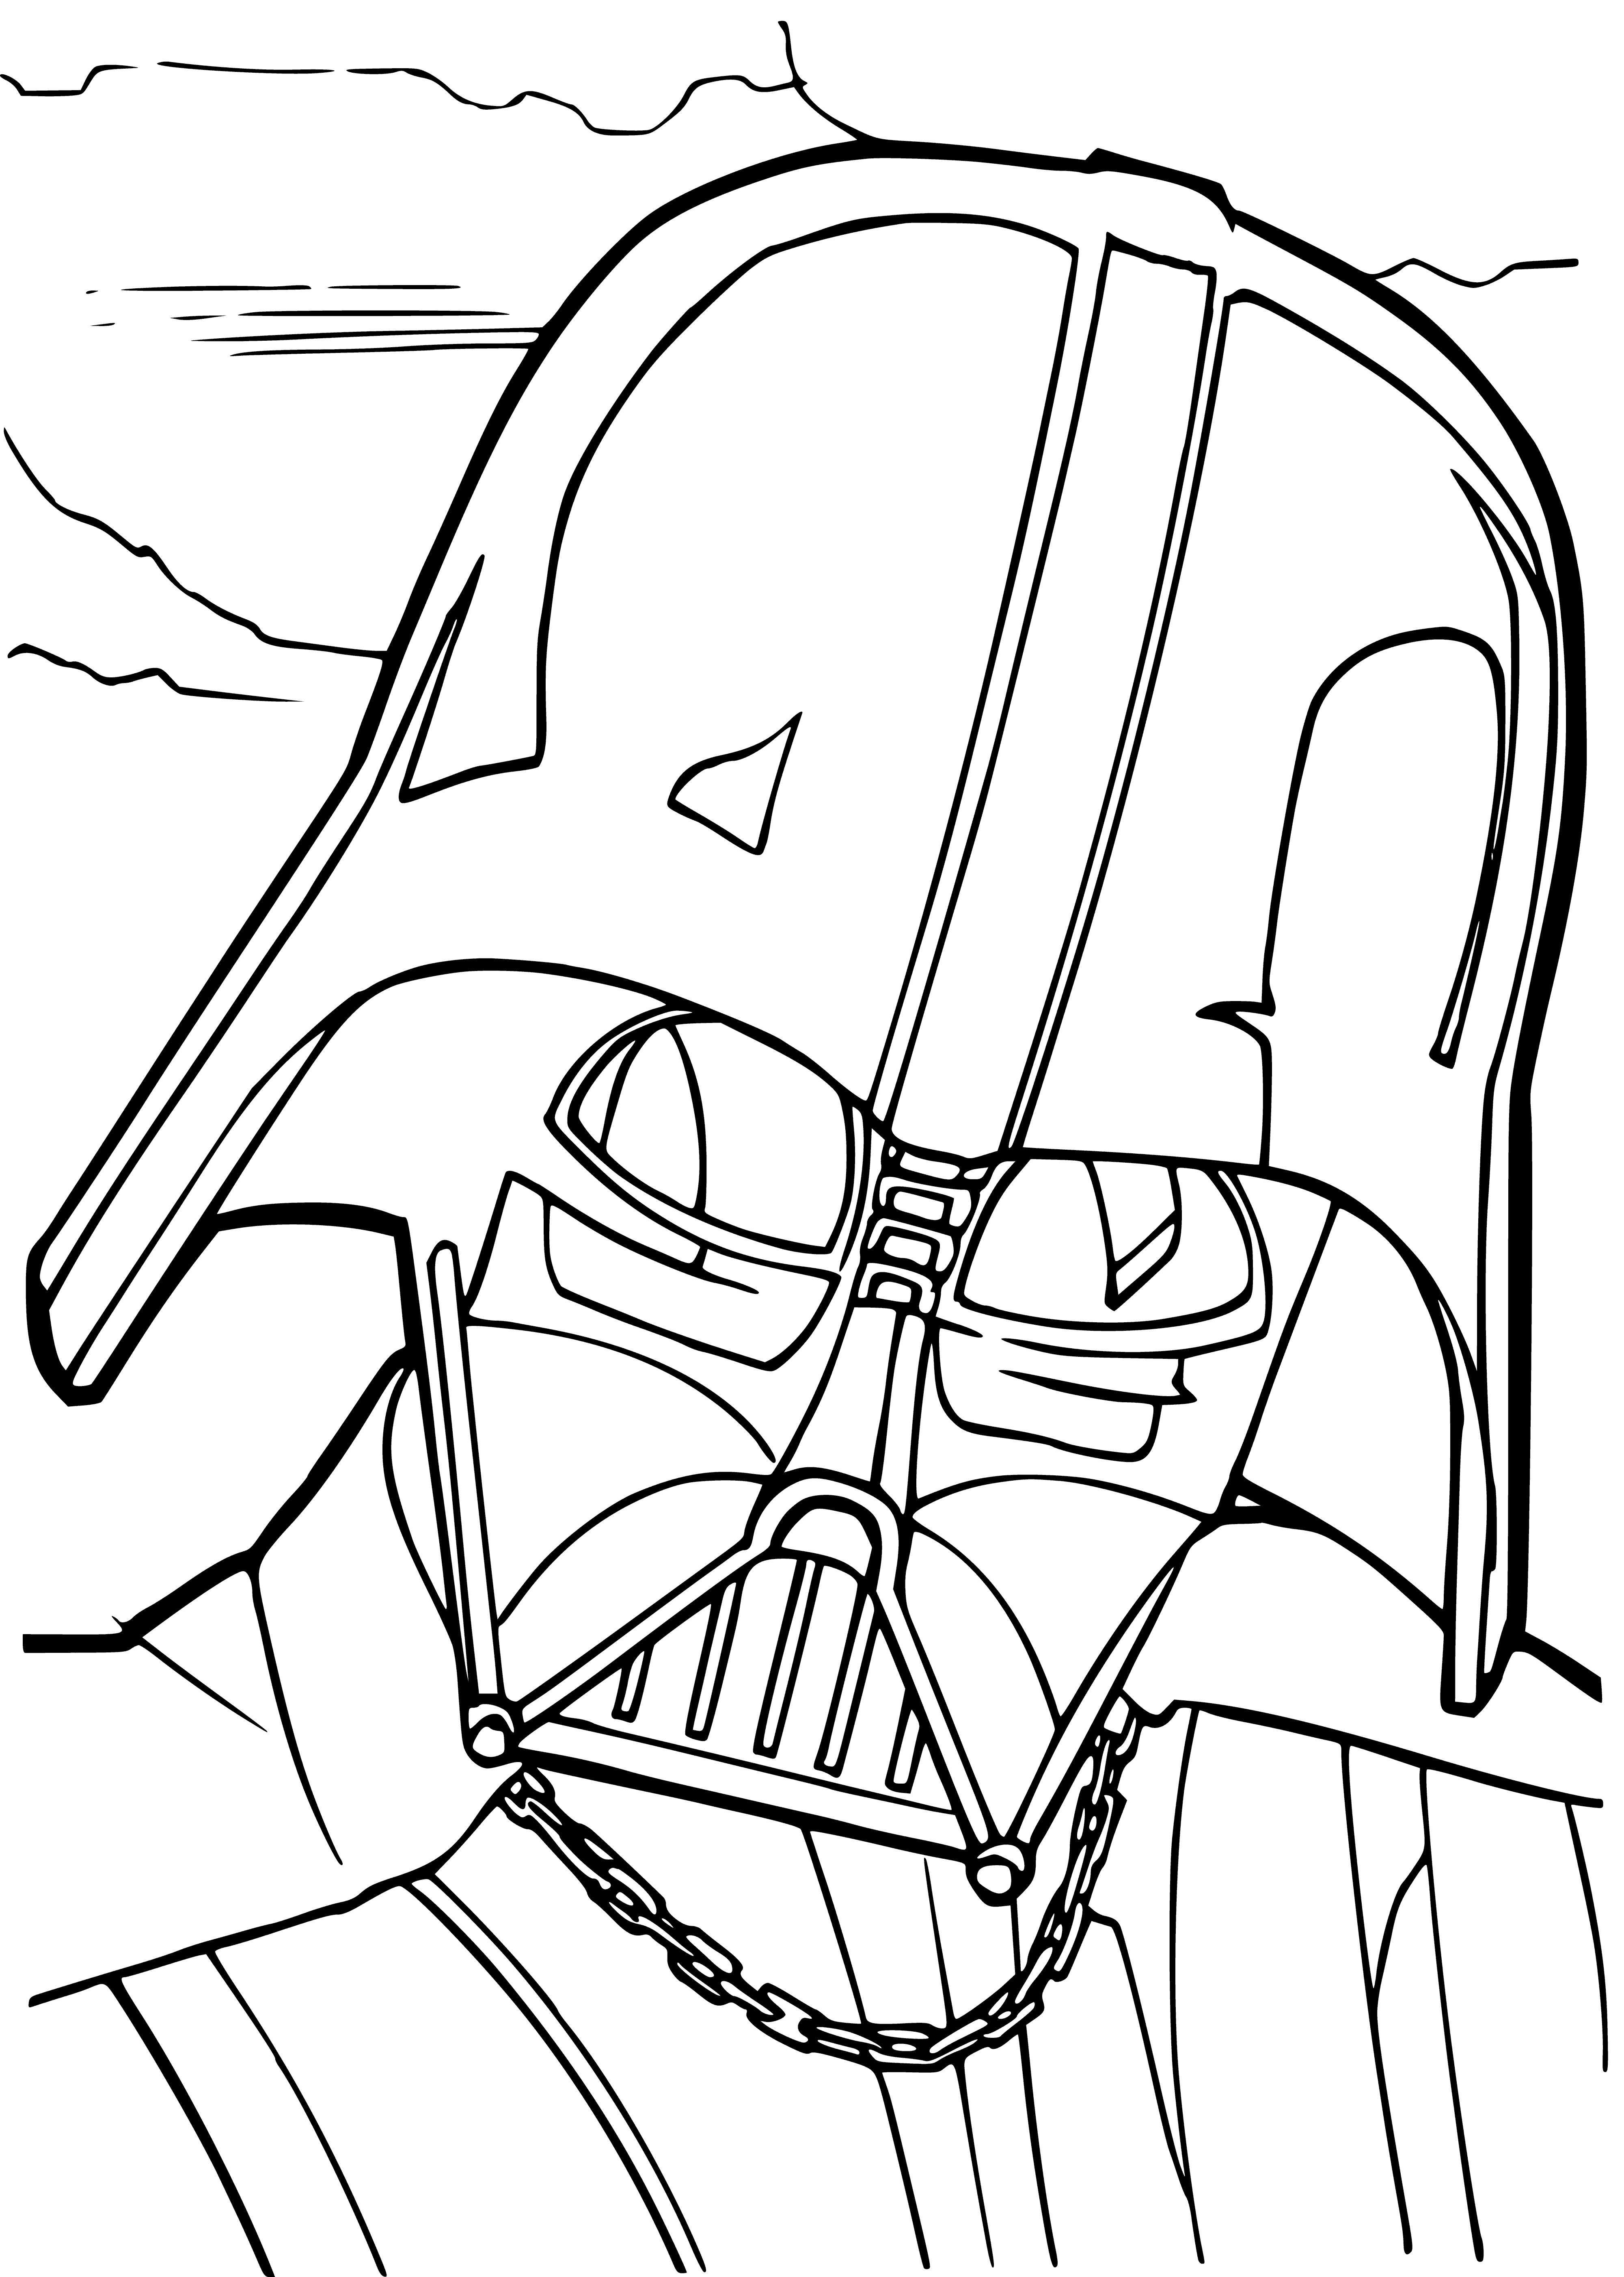 coloring page: Darth Vader's iconic black helmet & cape, menacing look & glowing red eyes give him a powerful presence.